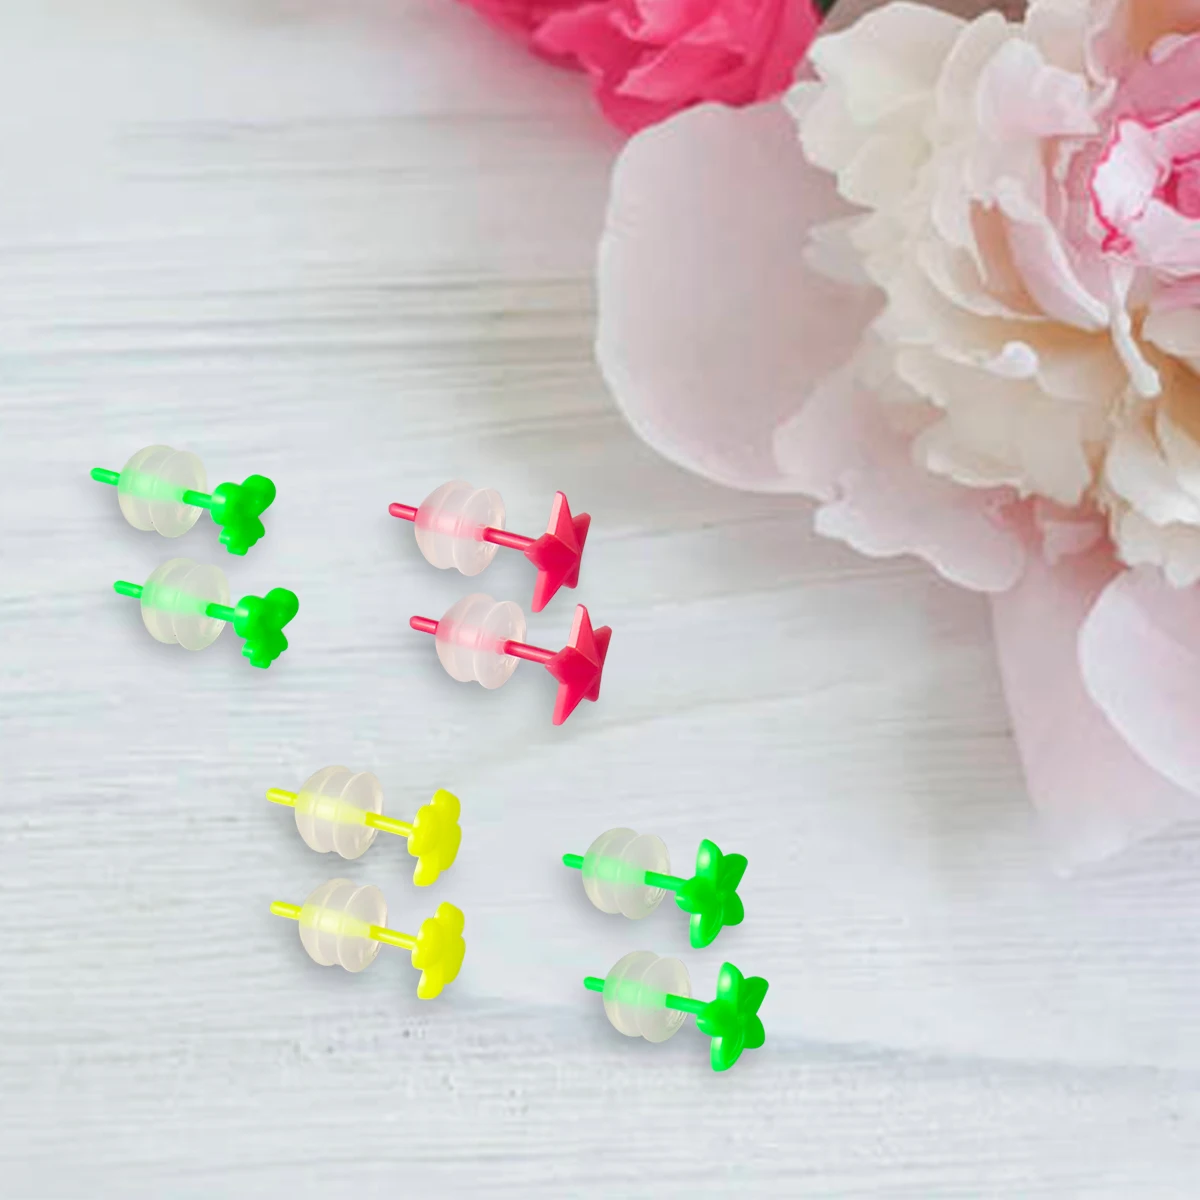 12 Pairs Plastic Earrings for Sensitive Ears,Plastic Post Earrings for  Lady,Star Bow Clover Frangipani Stud Earrings with 3color